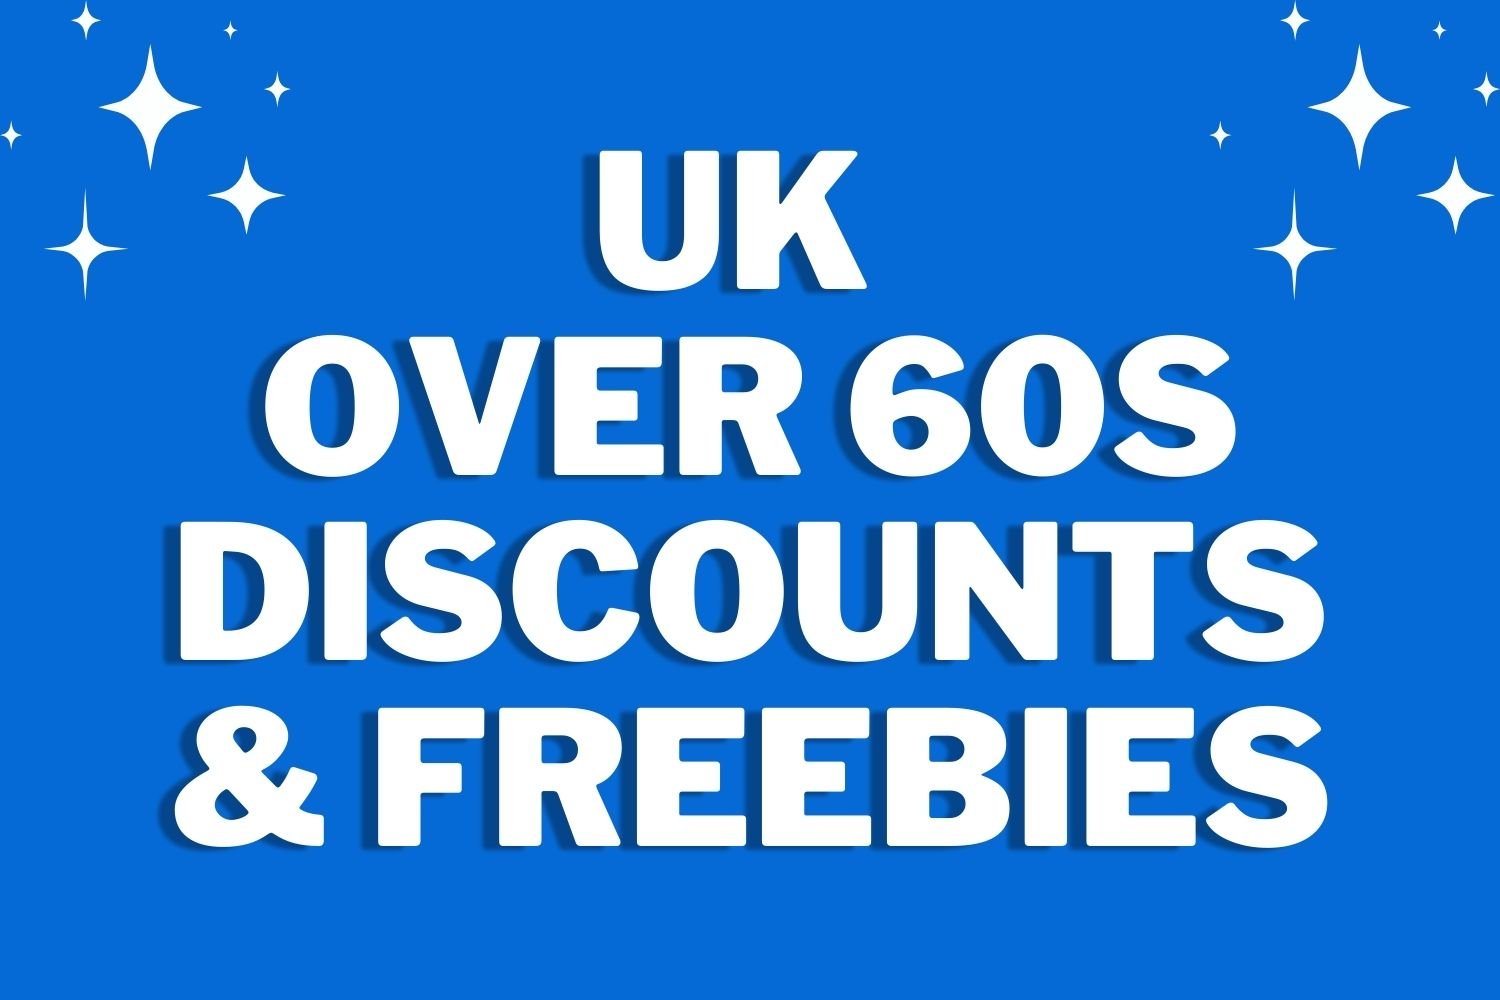 UK Over 60s Discounts and Freebies